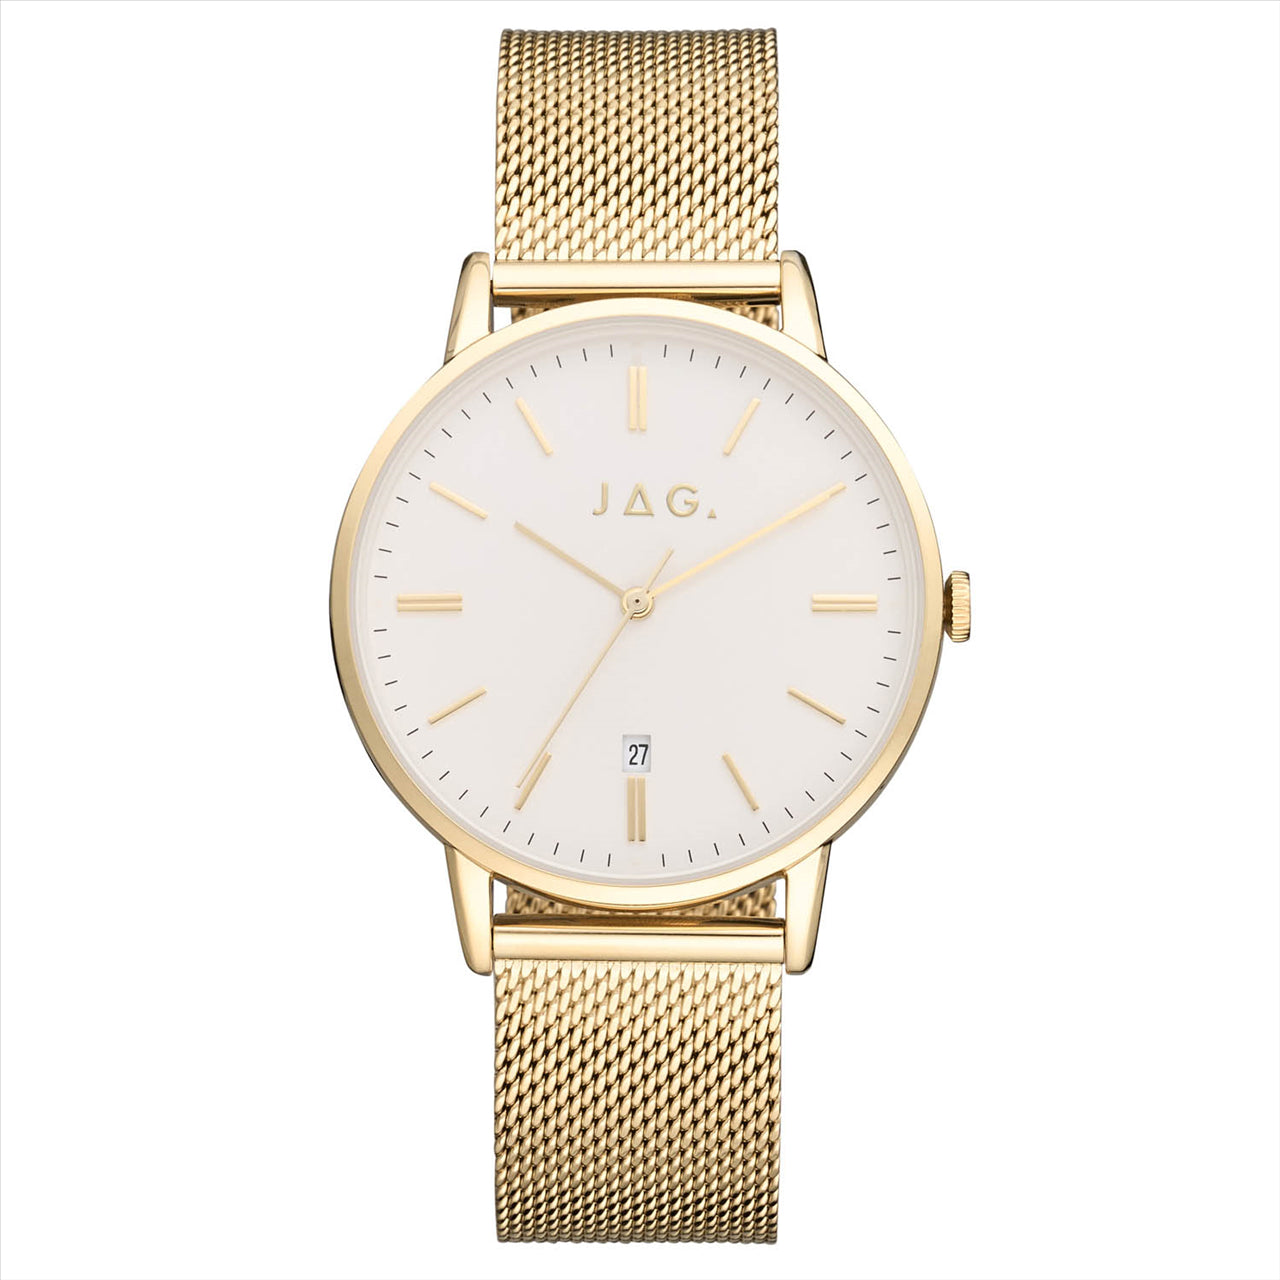 Men's Gold Plated Stainless Steel JAG Watch With Gold Plated Stainless Steel Mesh Band